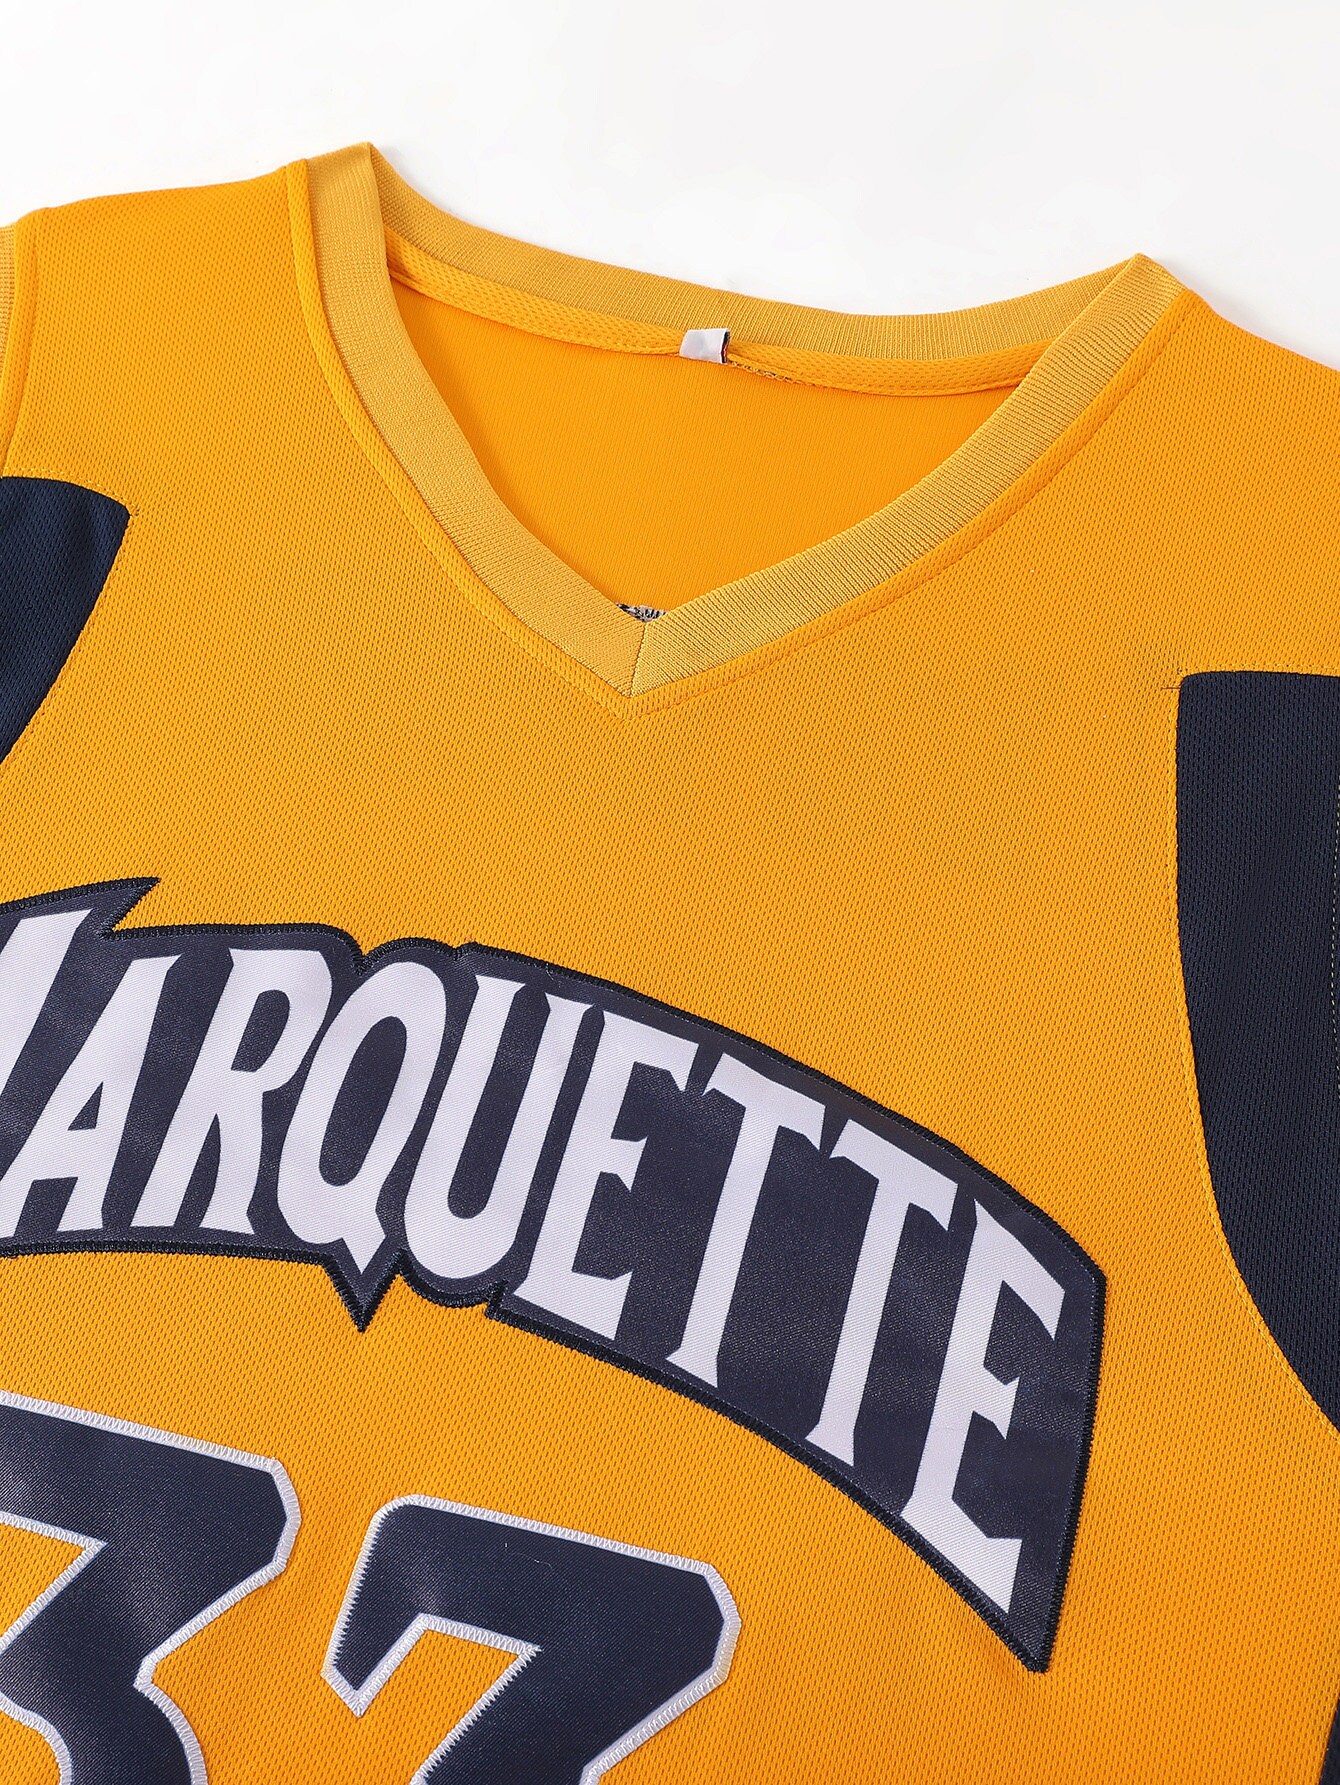 Jimmy Butler Marquette Basketball Jersey College